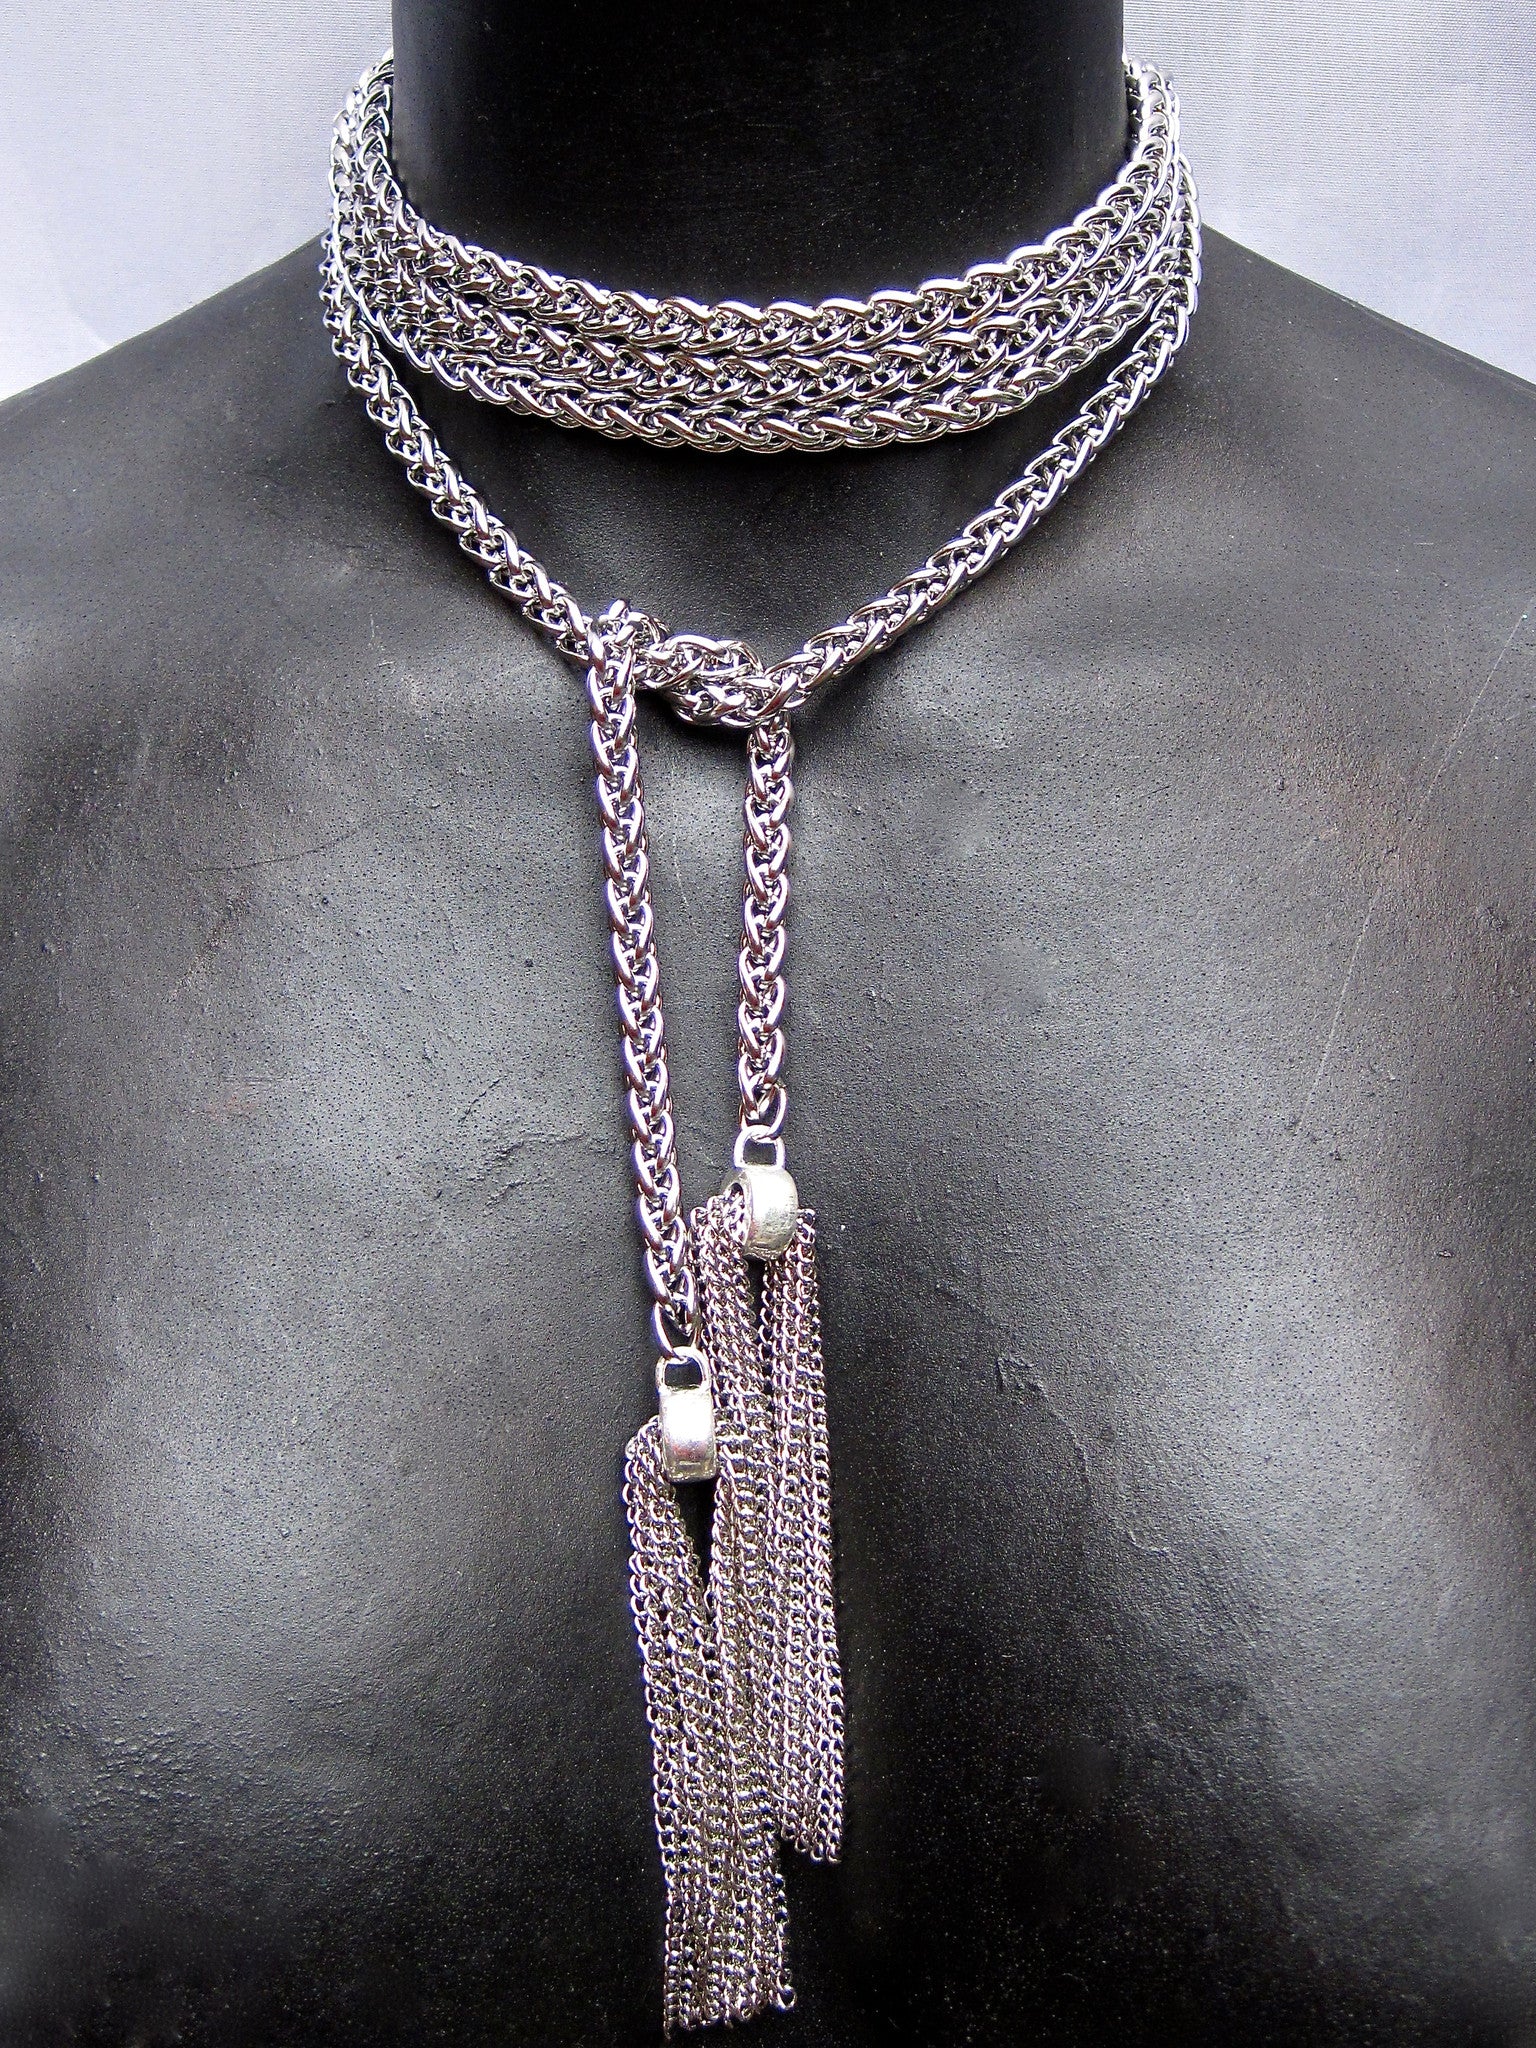 EXTRA LONG STAINLESS STEEL LARIAT NECKLACE WITH CHAIN TASSELS. by NYET Jewelry.